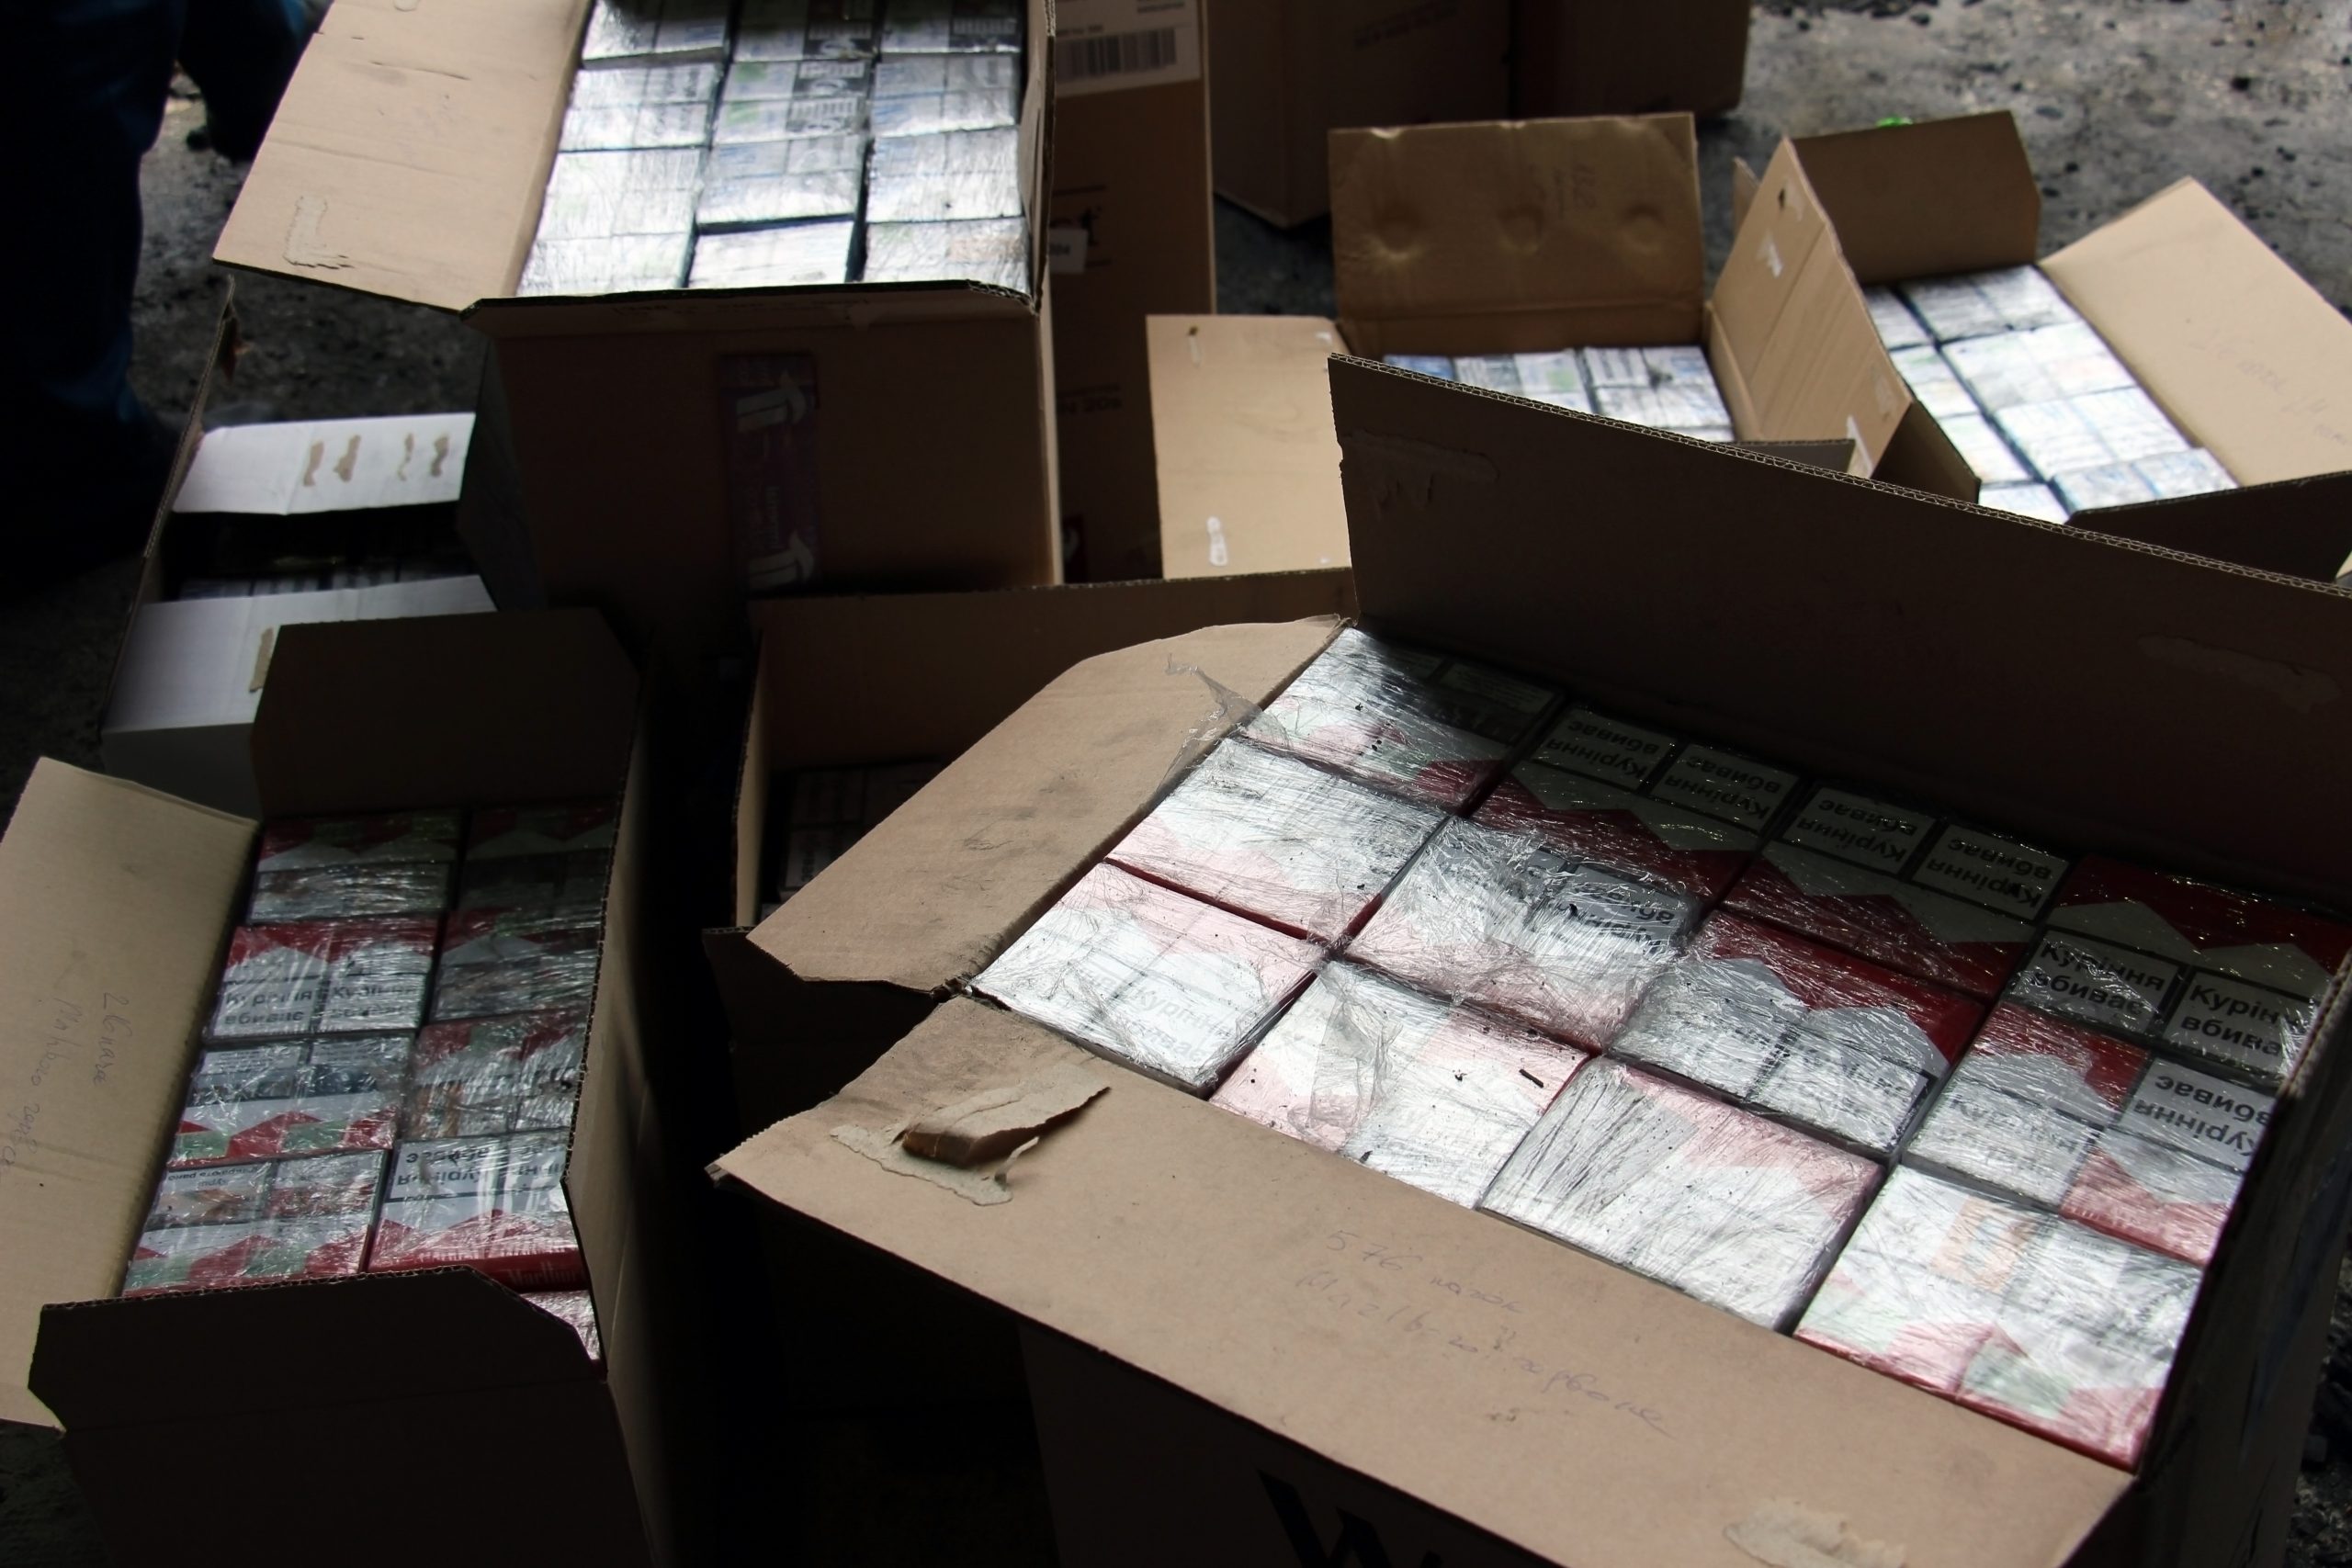 It’s a Crime – Retailer jailed for selling illicit tobacco